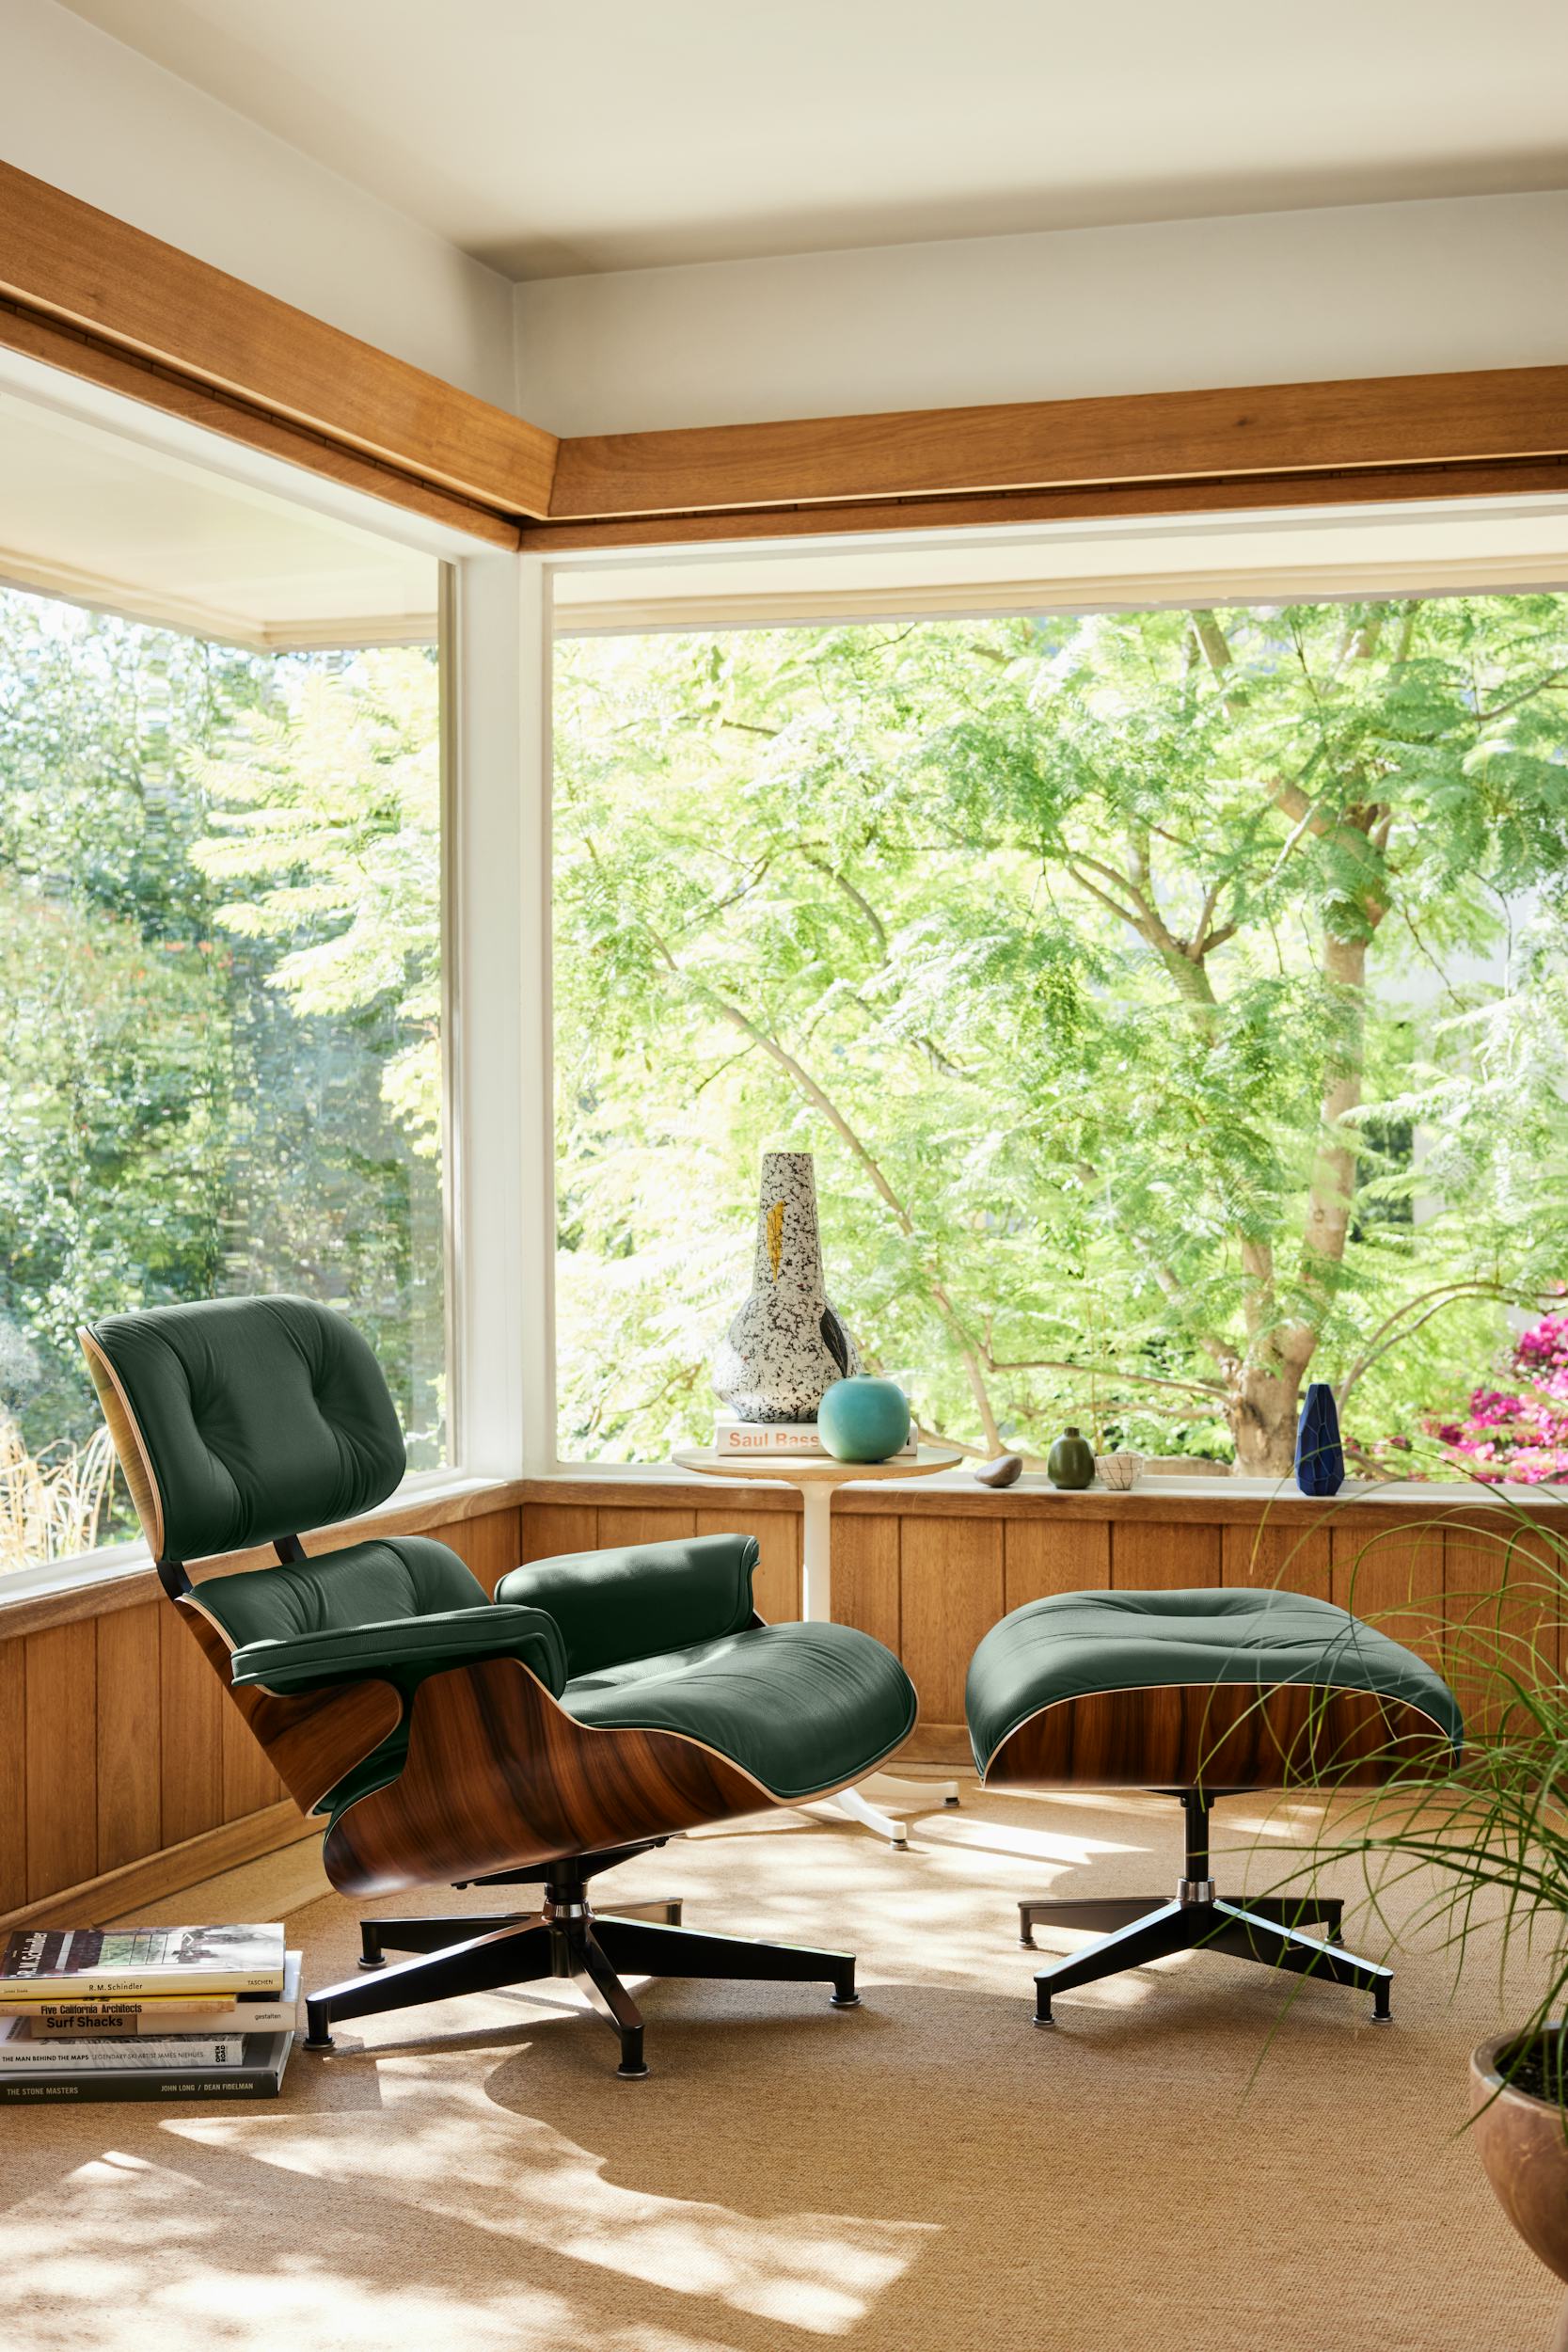 Five modern chairs that add style to the home